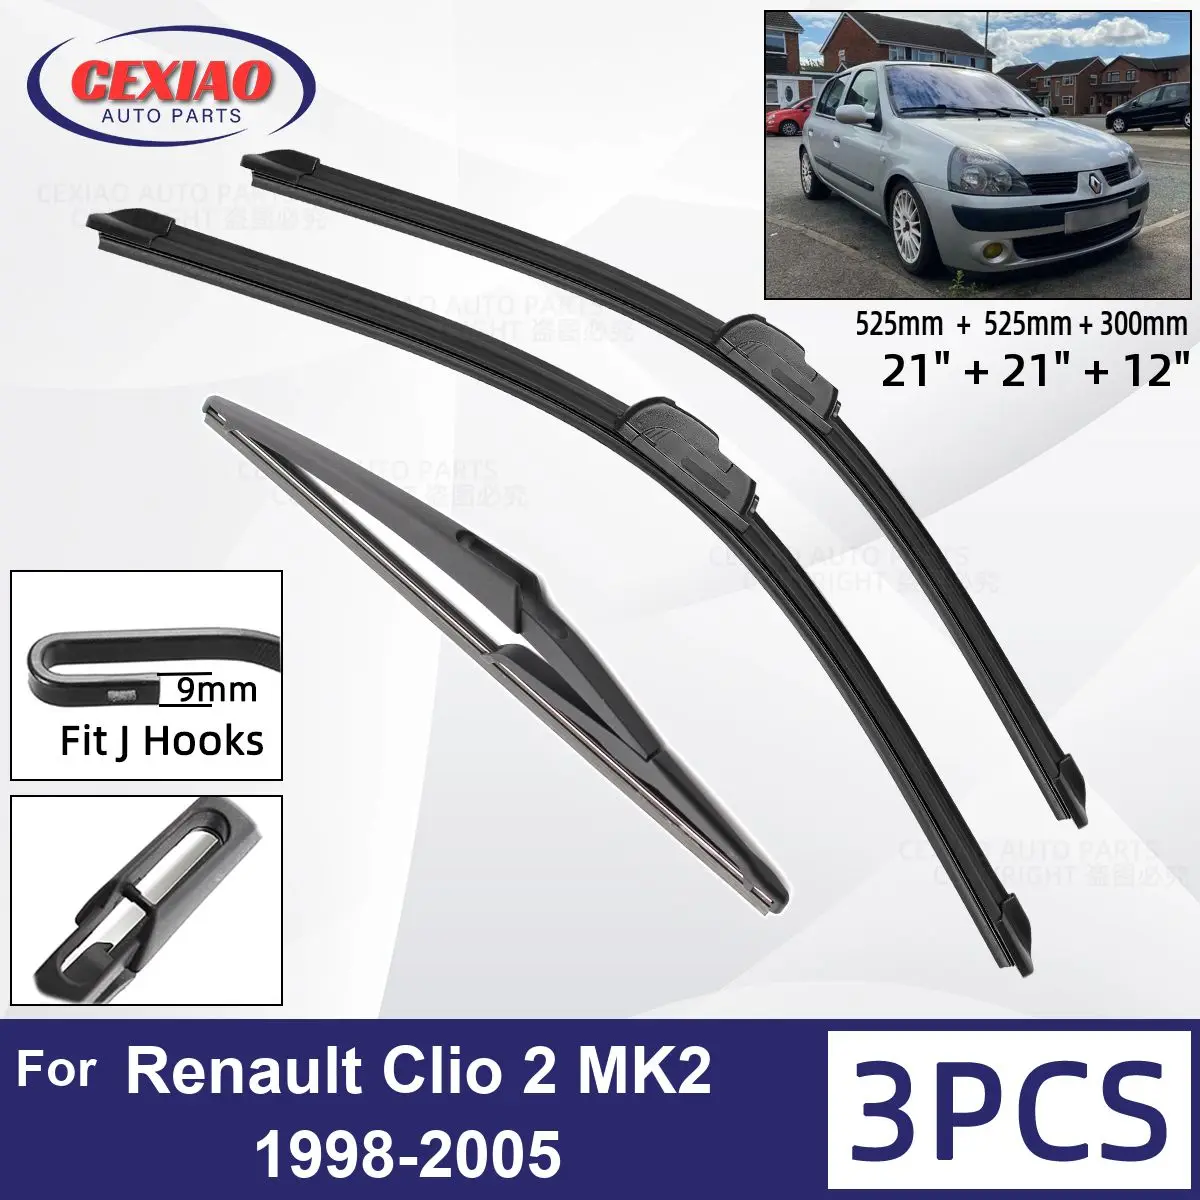 

For Renault Clio 2 MK2 1998-2005 Car Front Rear Wiper Blades Soft Rubber Windscreen Wipers Auto Windshield 21"+21"+12" 2003 2004